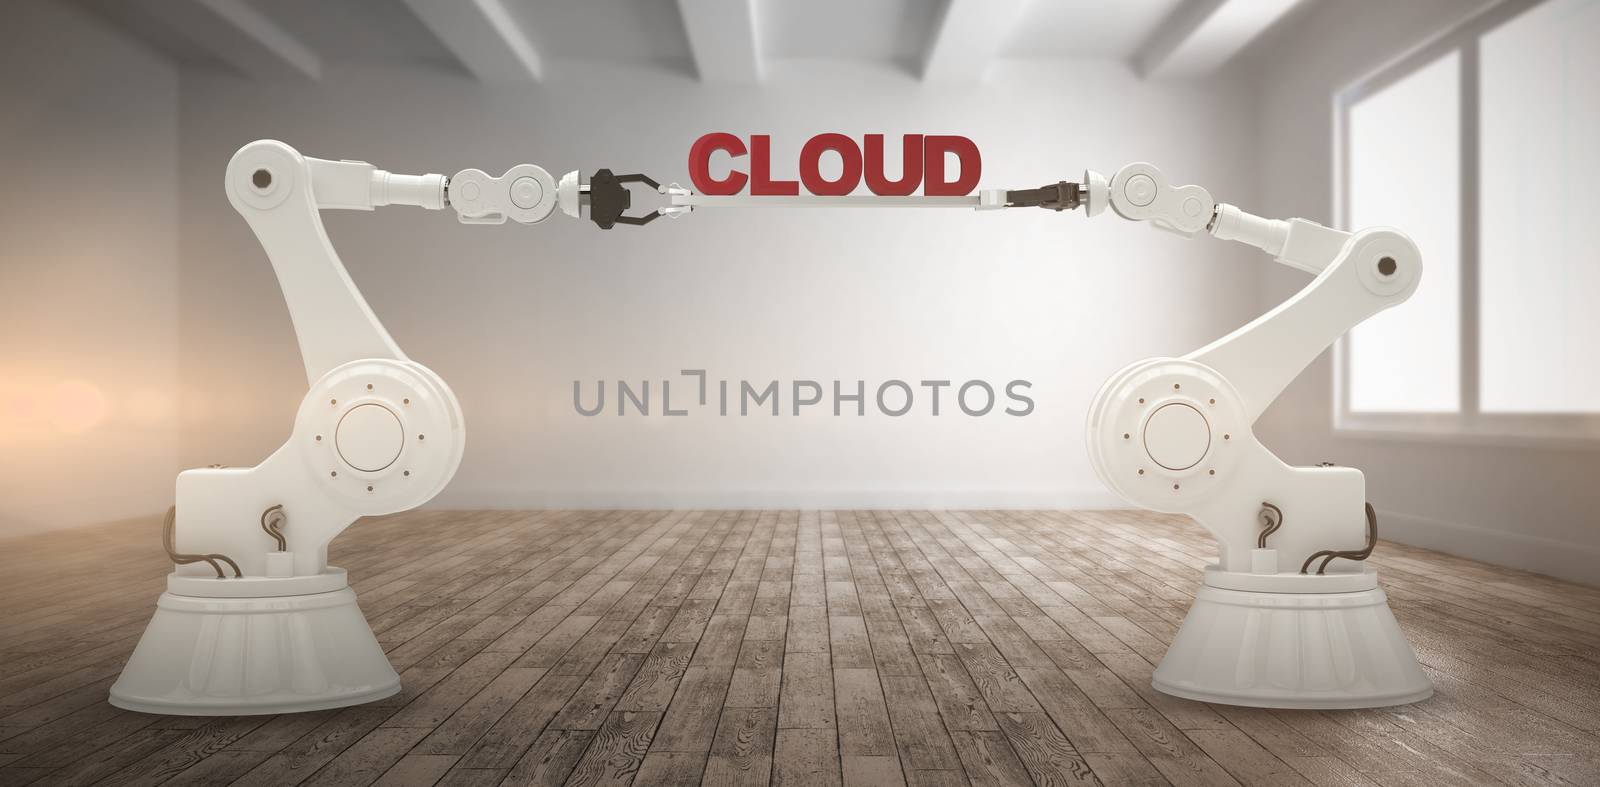 Composite image of computer generated image of mechanical robotic hands holding cloud text by Wavebreakmedia